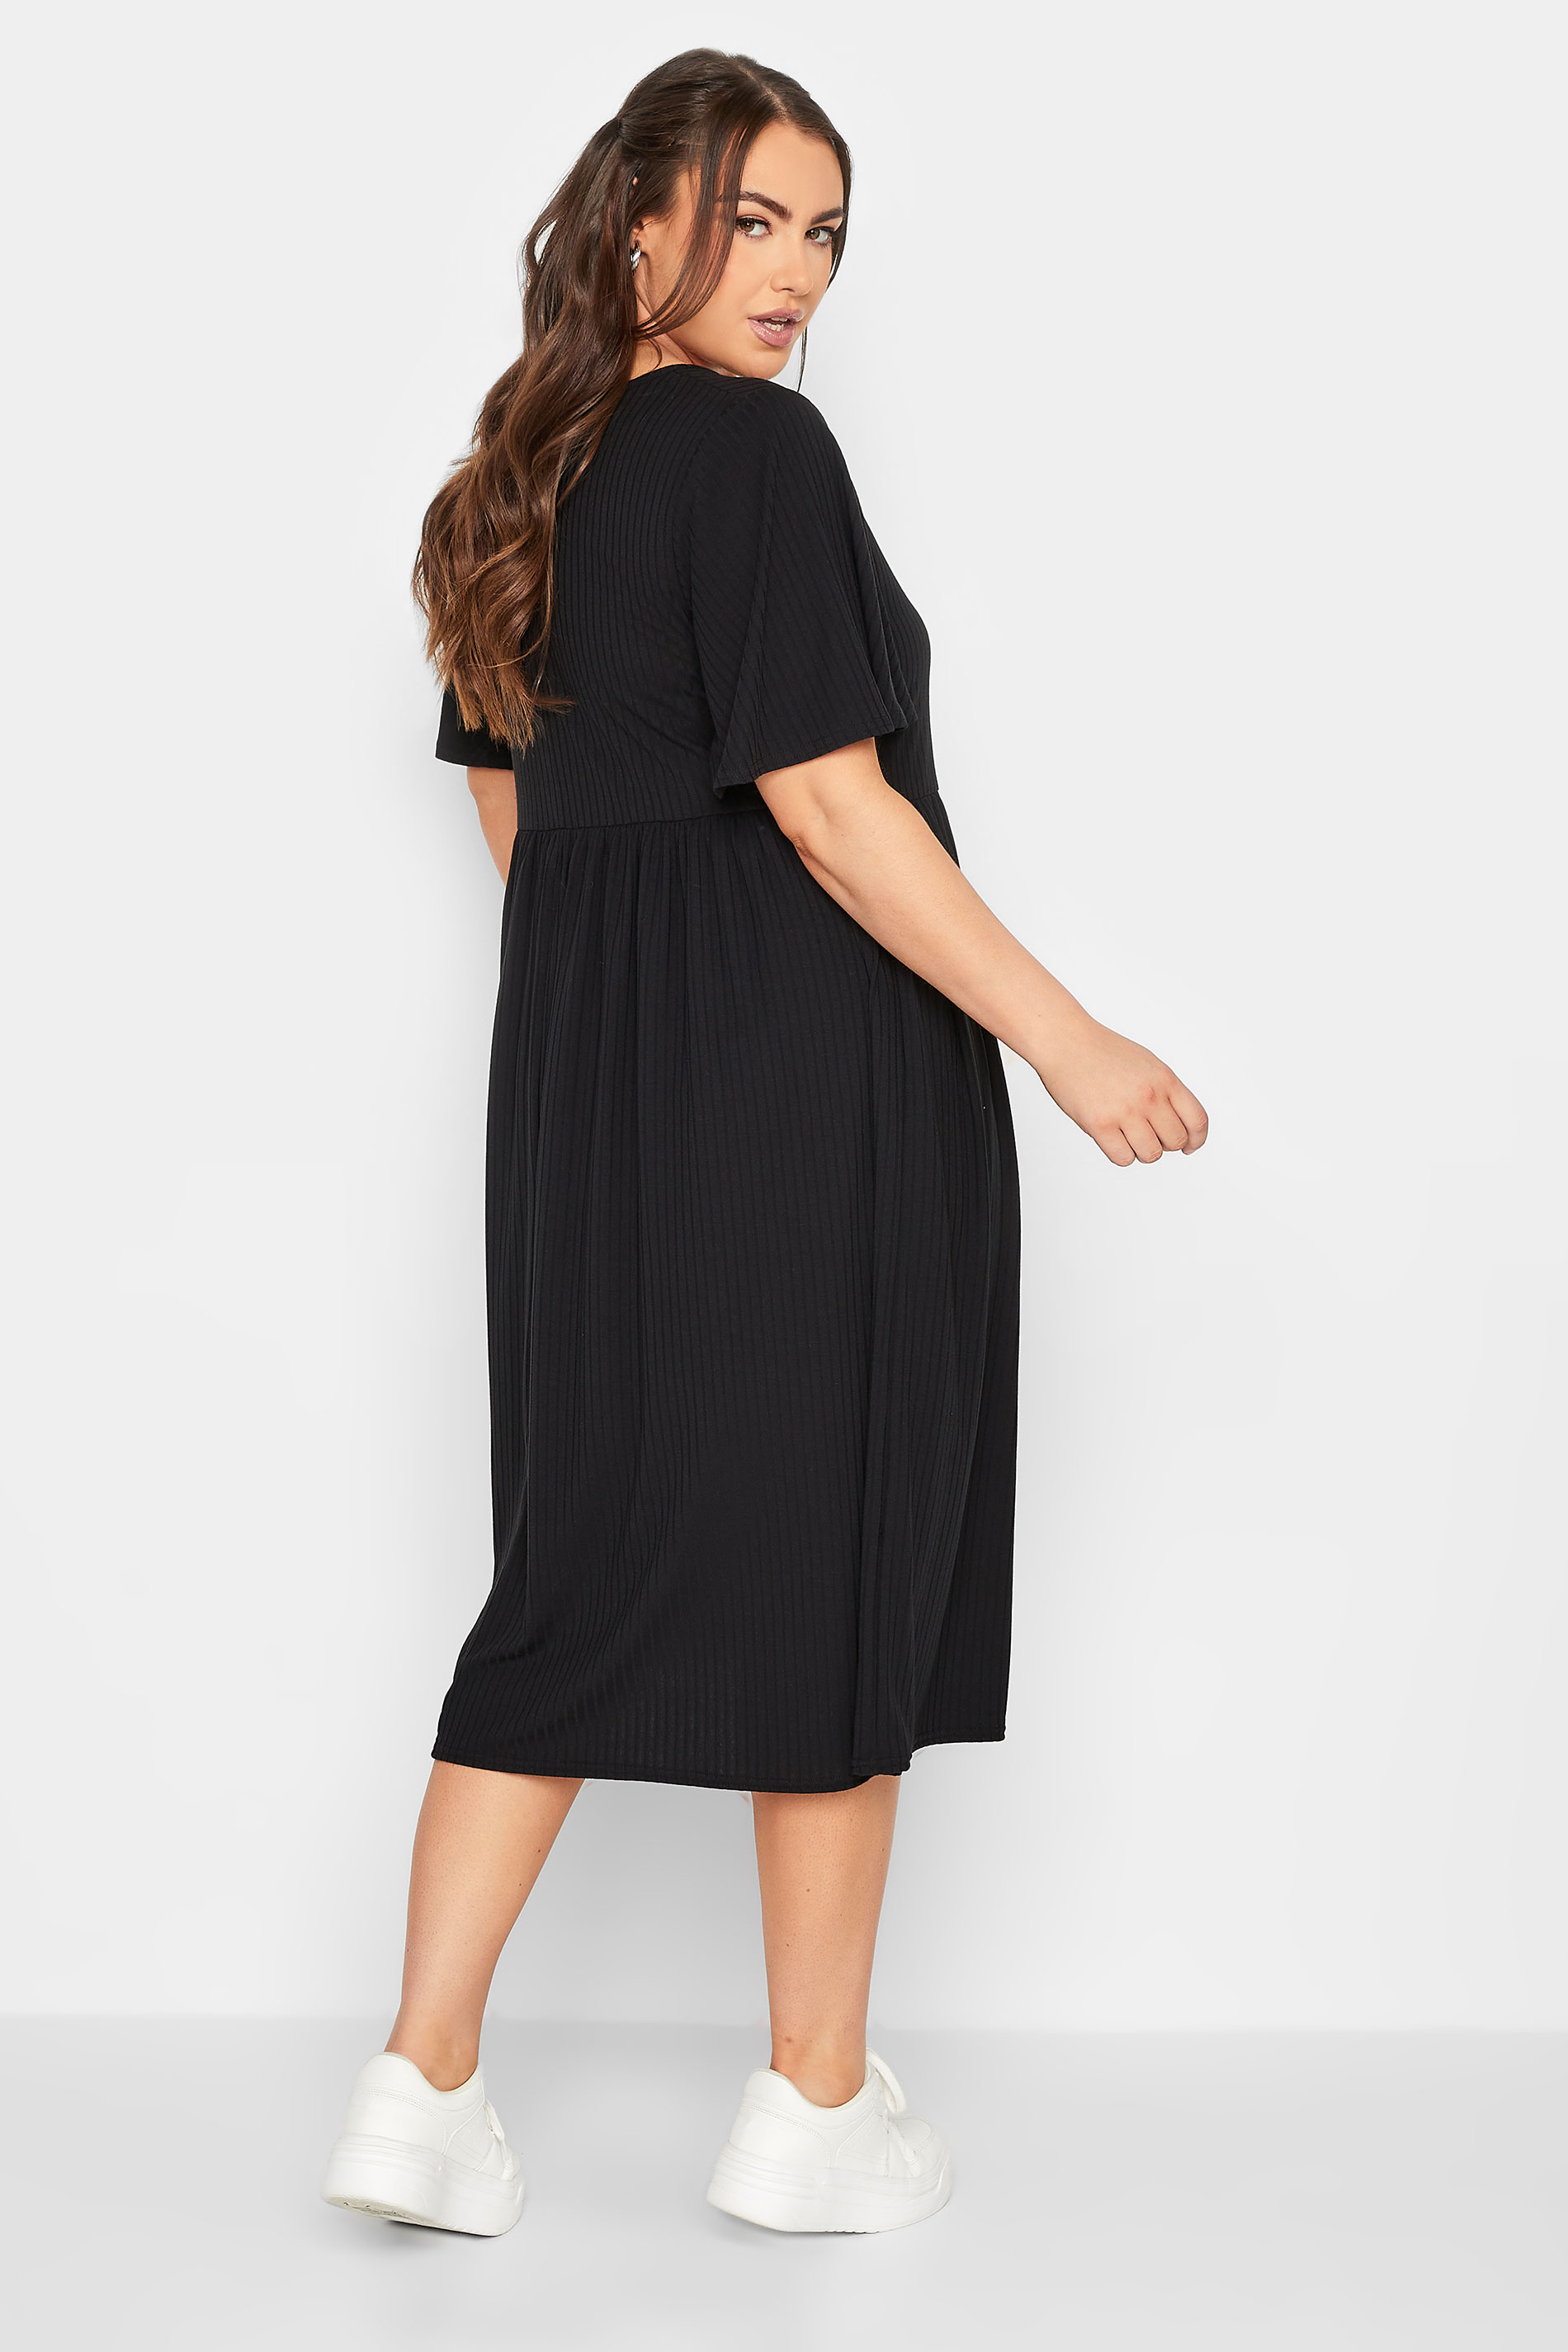 LIMITED COLLECTION Plus Size Black Ribbed Square Neck Midi Dress | Yours Clothing 3